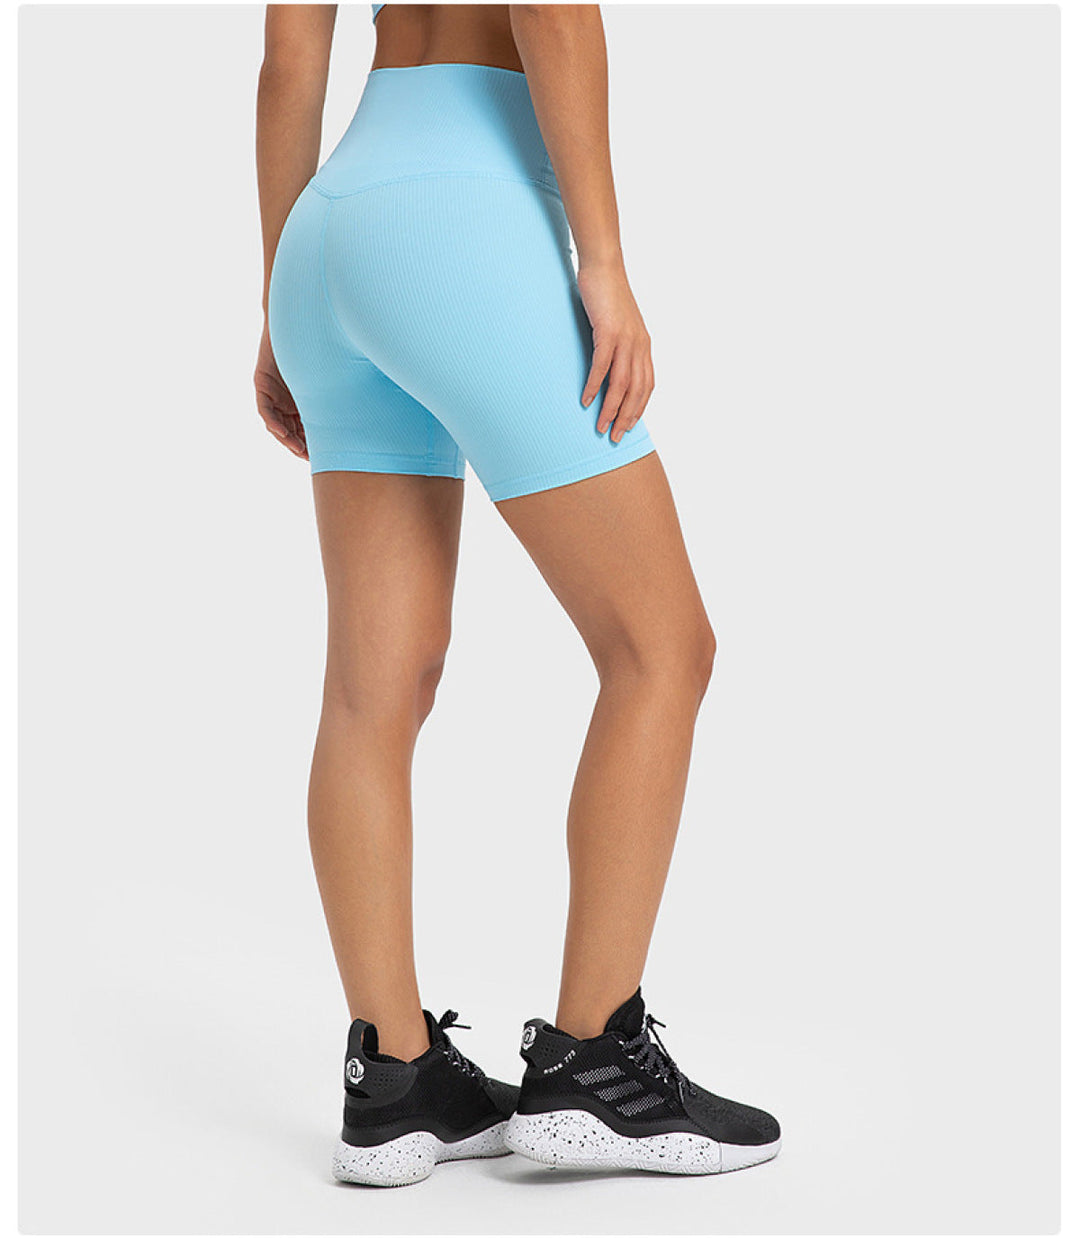 Solid Ribbed High Waist Bike Shorts With Side Pockets